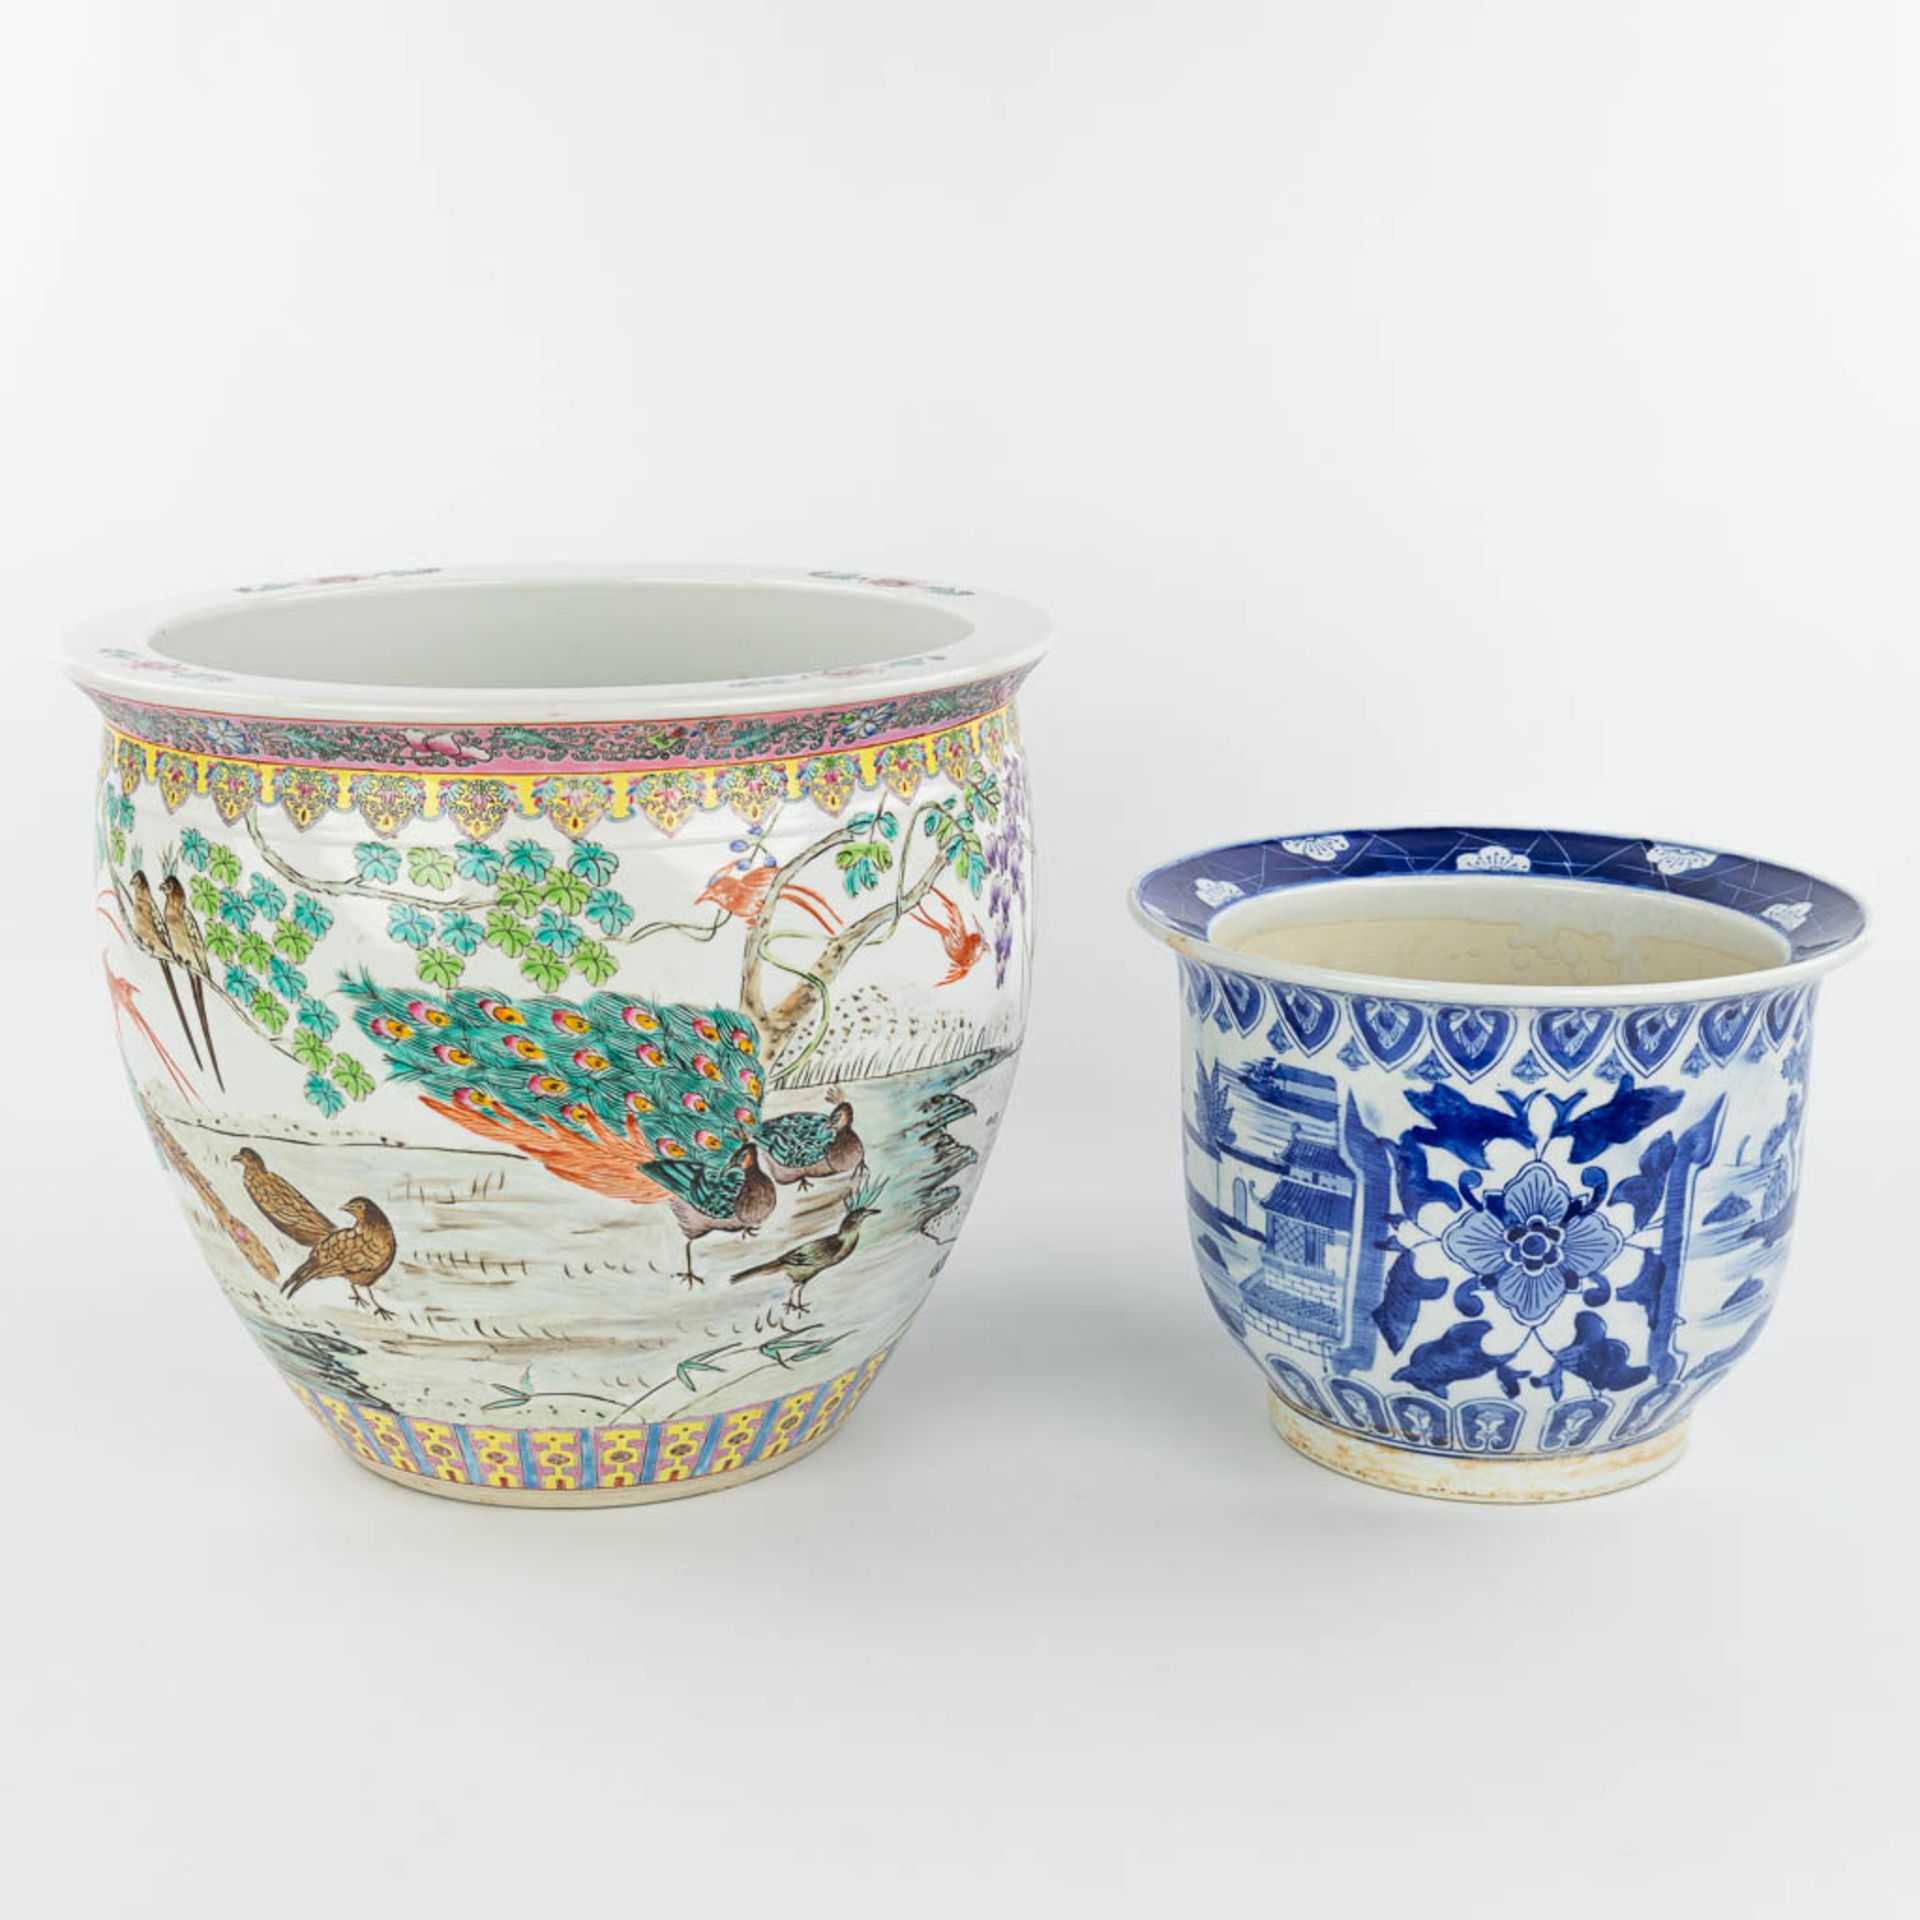 A set of 2 Chinese cache-pots made of porcelain of which 1 has a blue-white decor and the other a de - Image 4 of 15